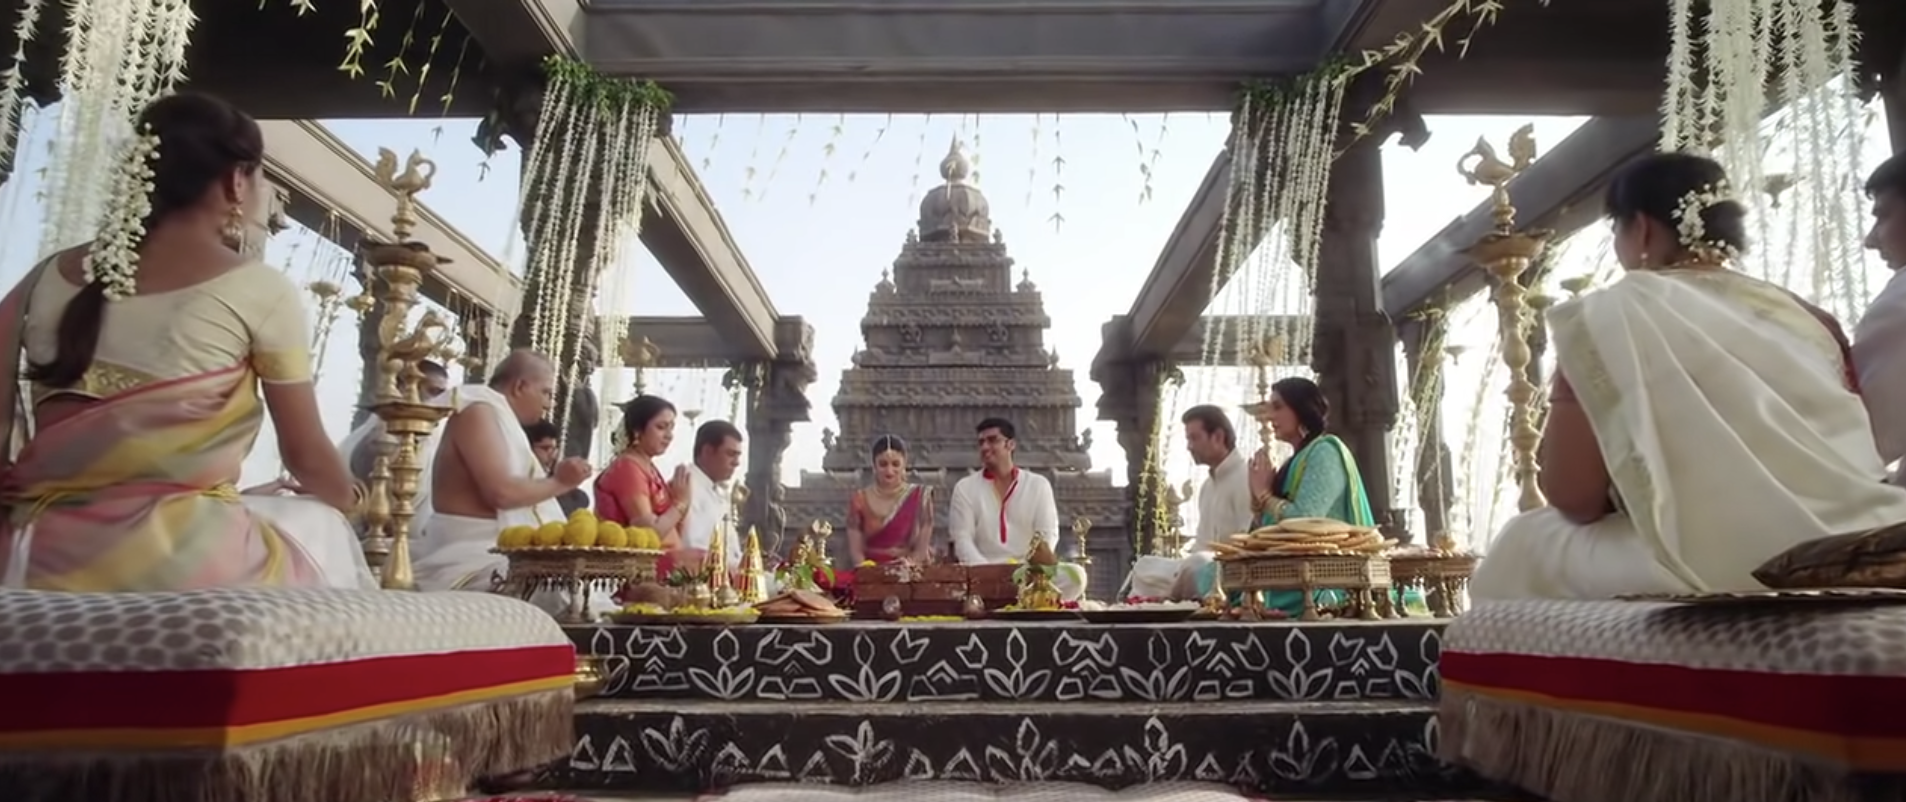 A couple sits cross legged at an altar, framed by family members also sitting, with a temple behind them and more guests sitting and watching